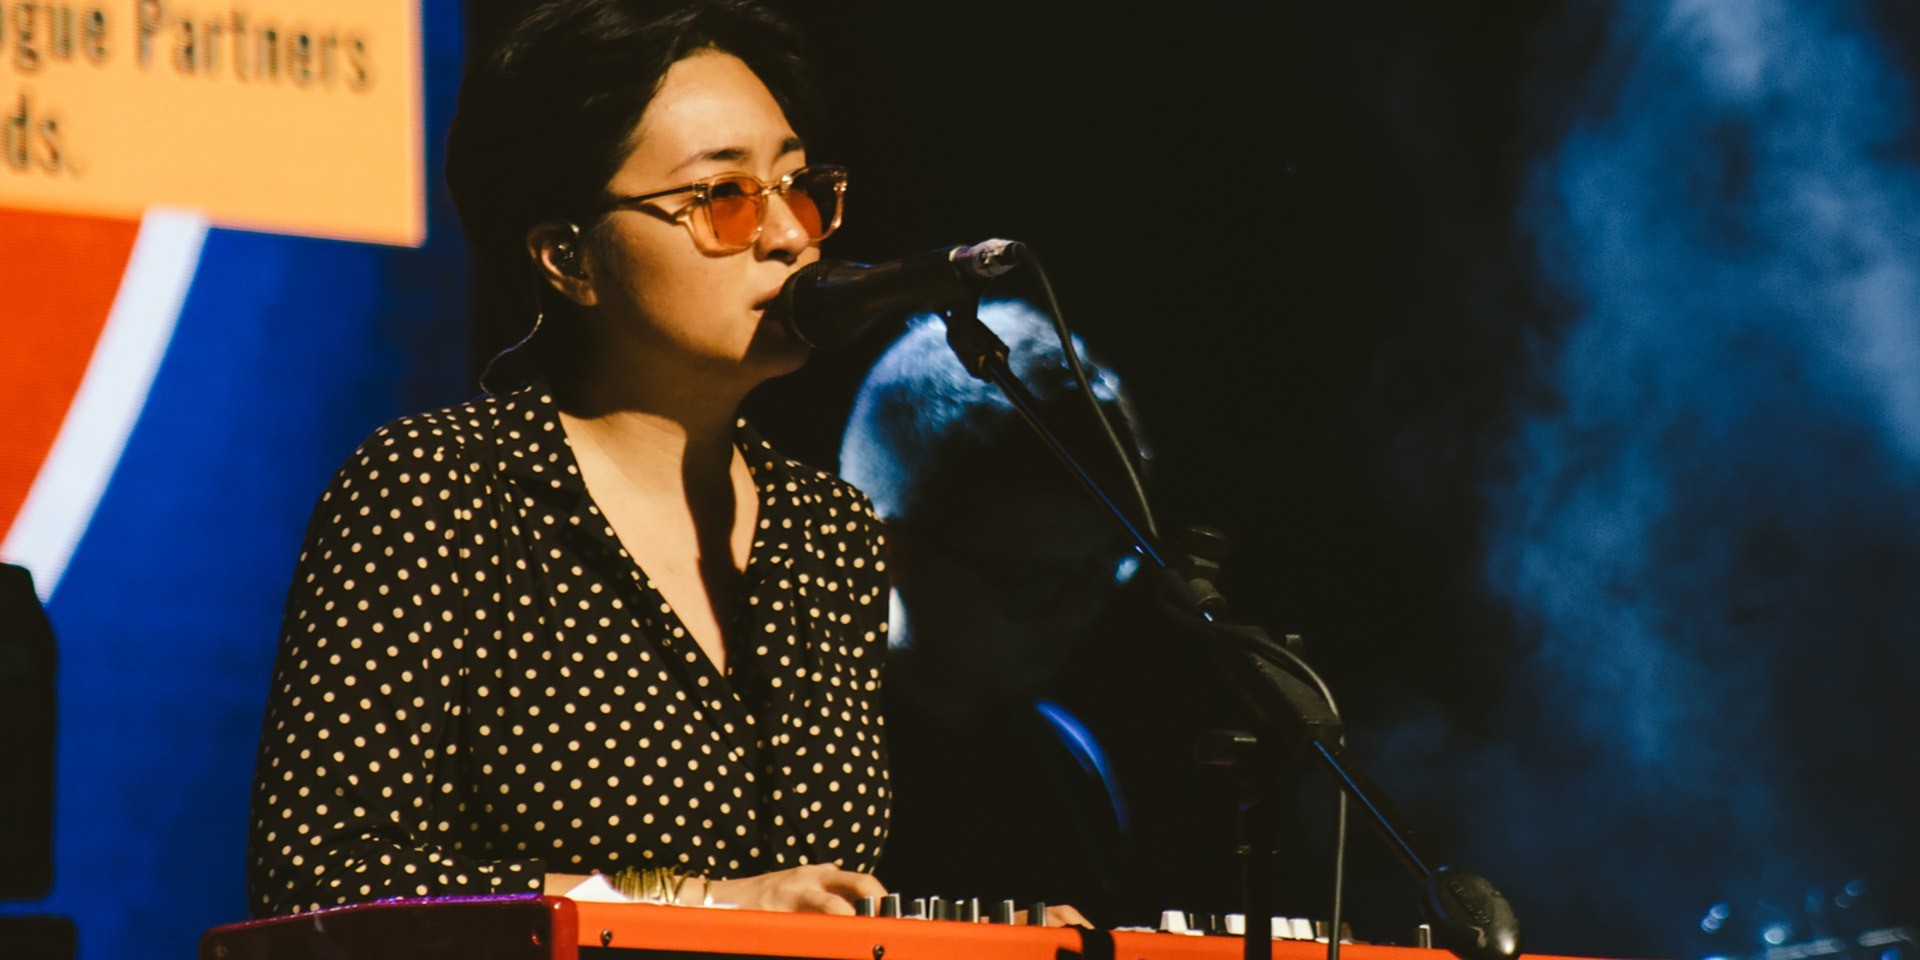 Armi Millare shares a snippet of UDD's upcoming album